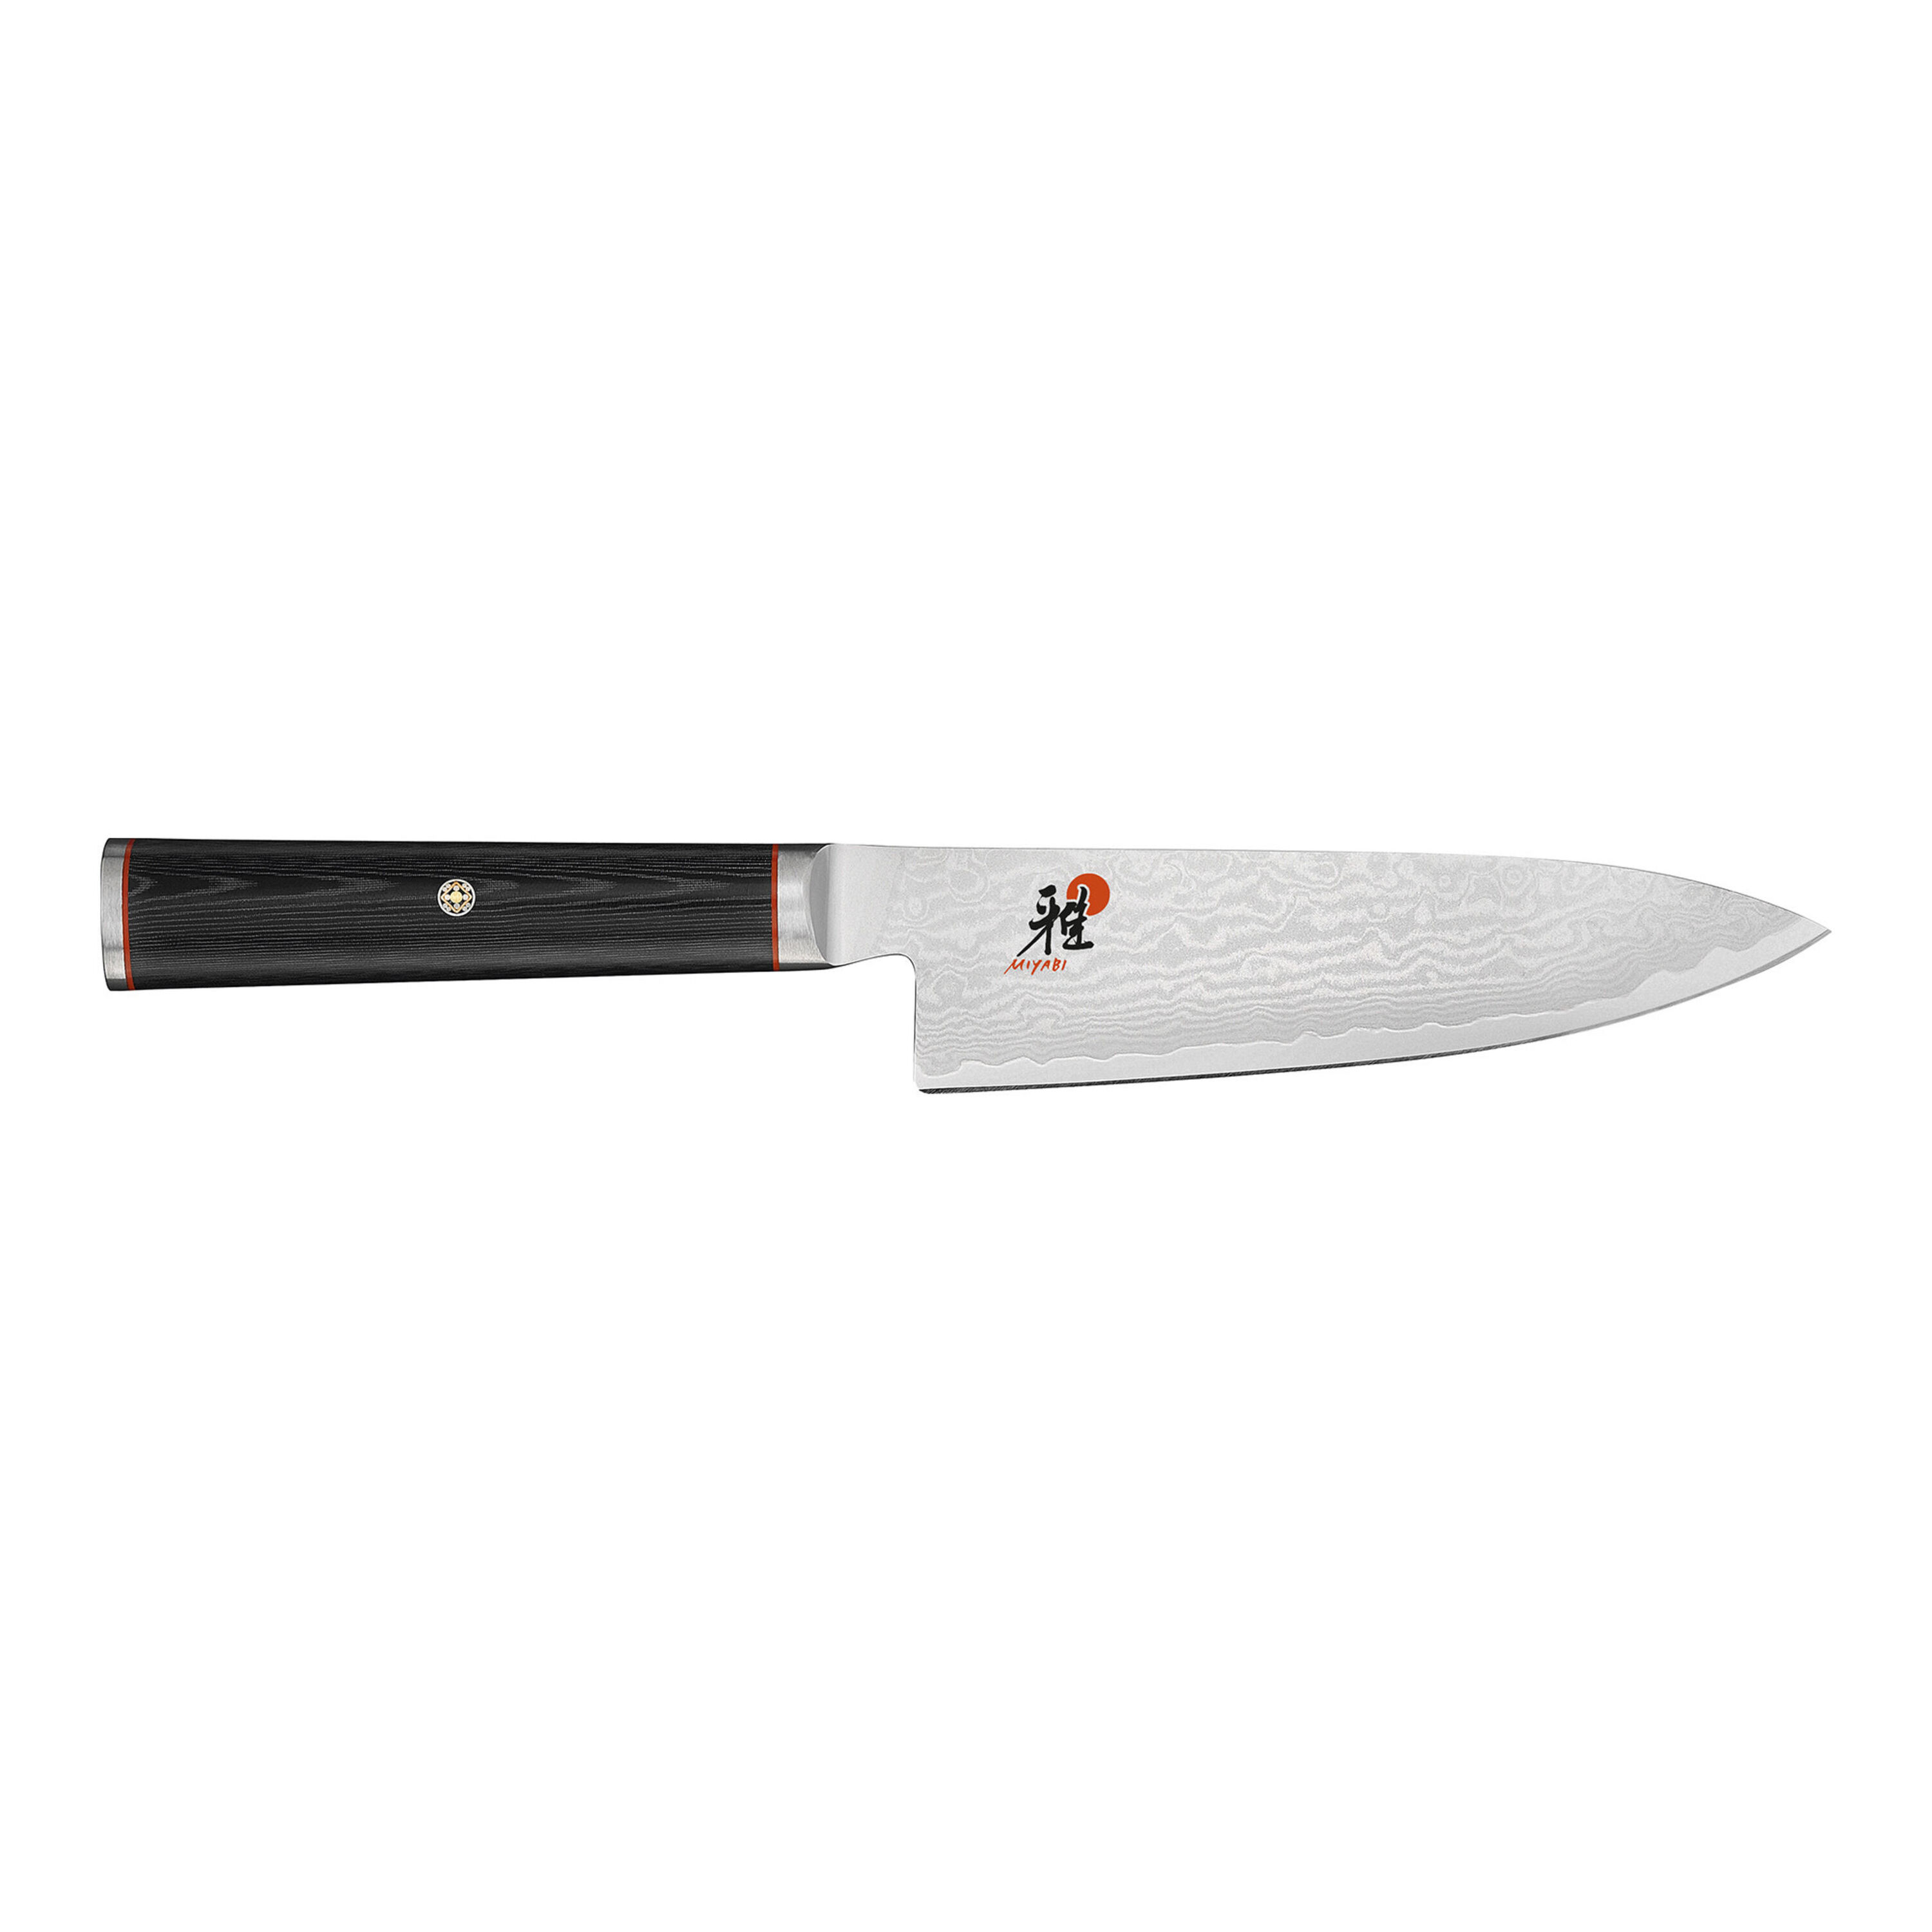 What to Use a 6 Inch Chef's Knife For